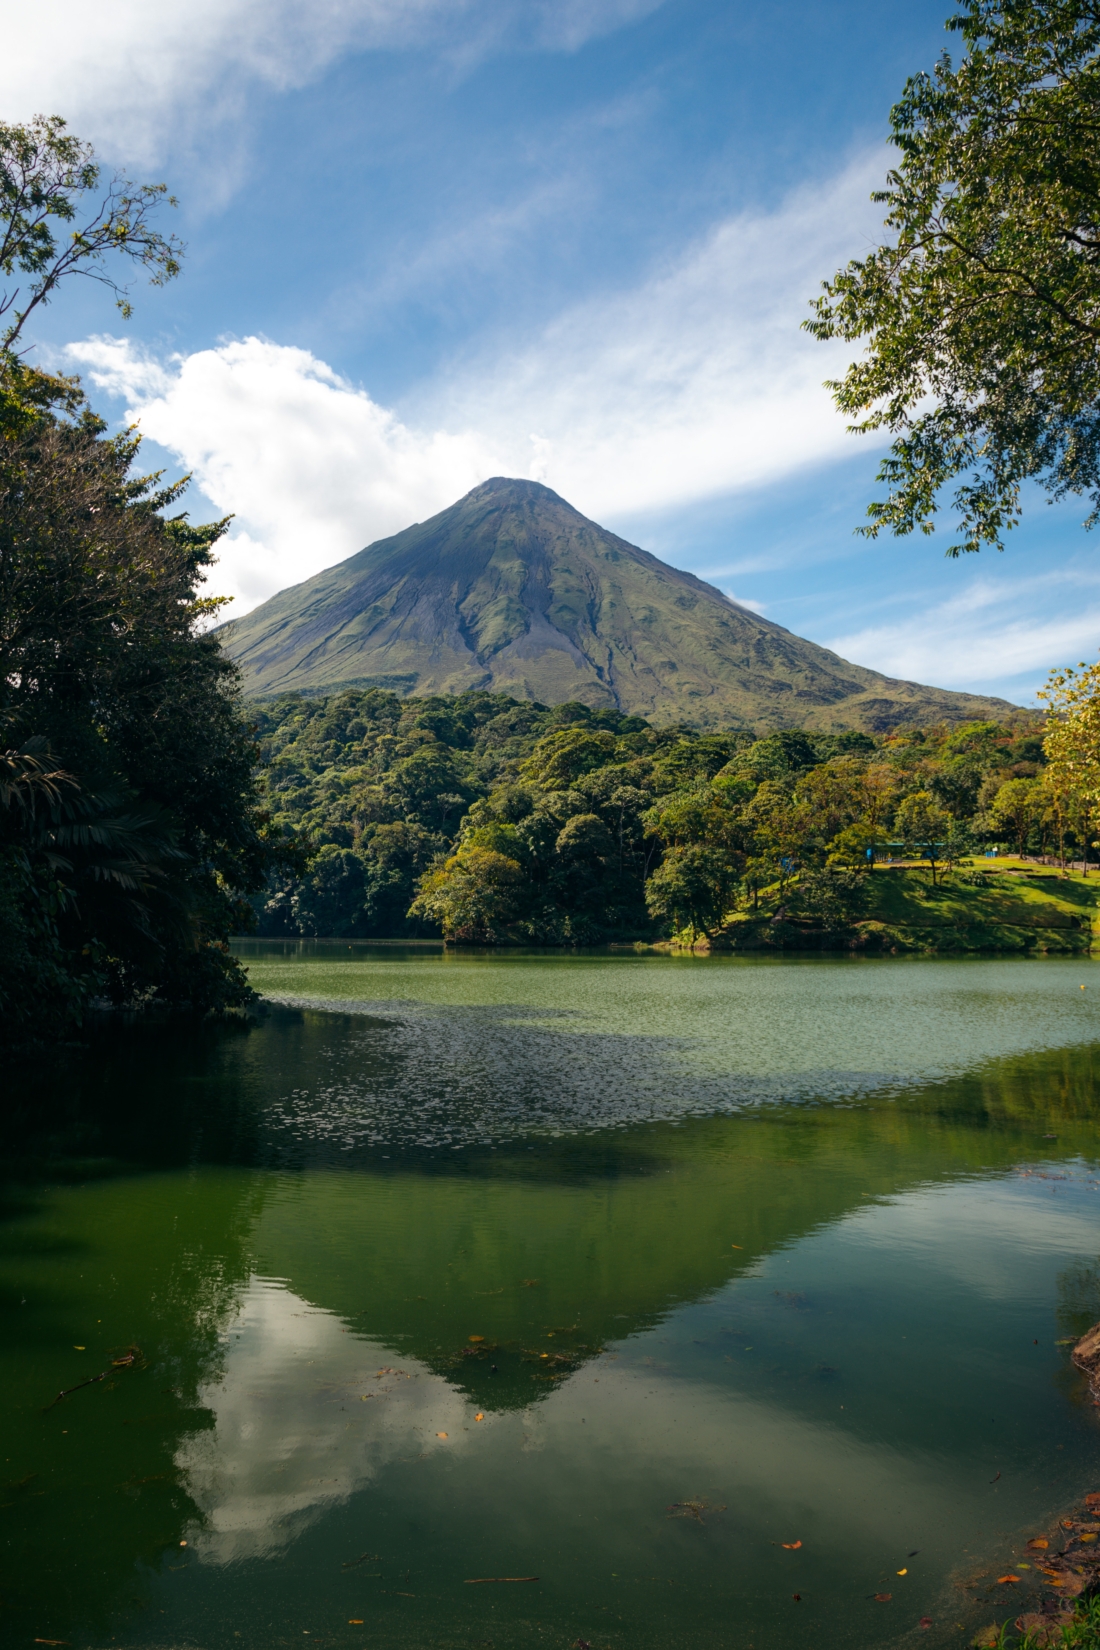 A lake sits at the forefront of the image as focus shifts to the mighty Arenal Volcano emerging from dense jungle